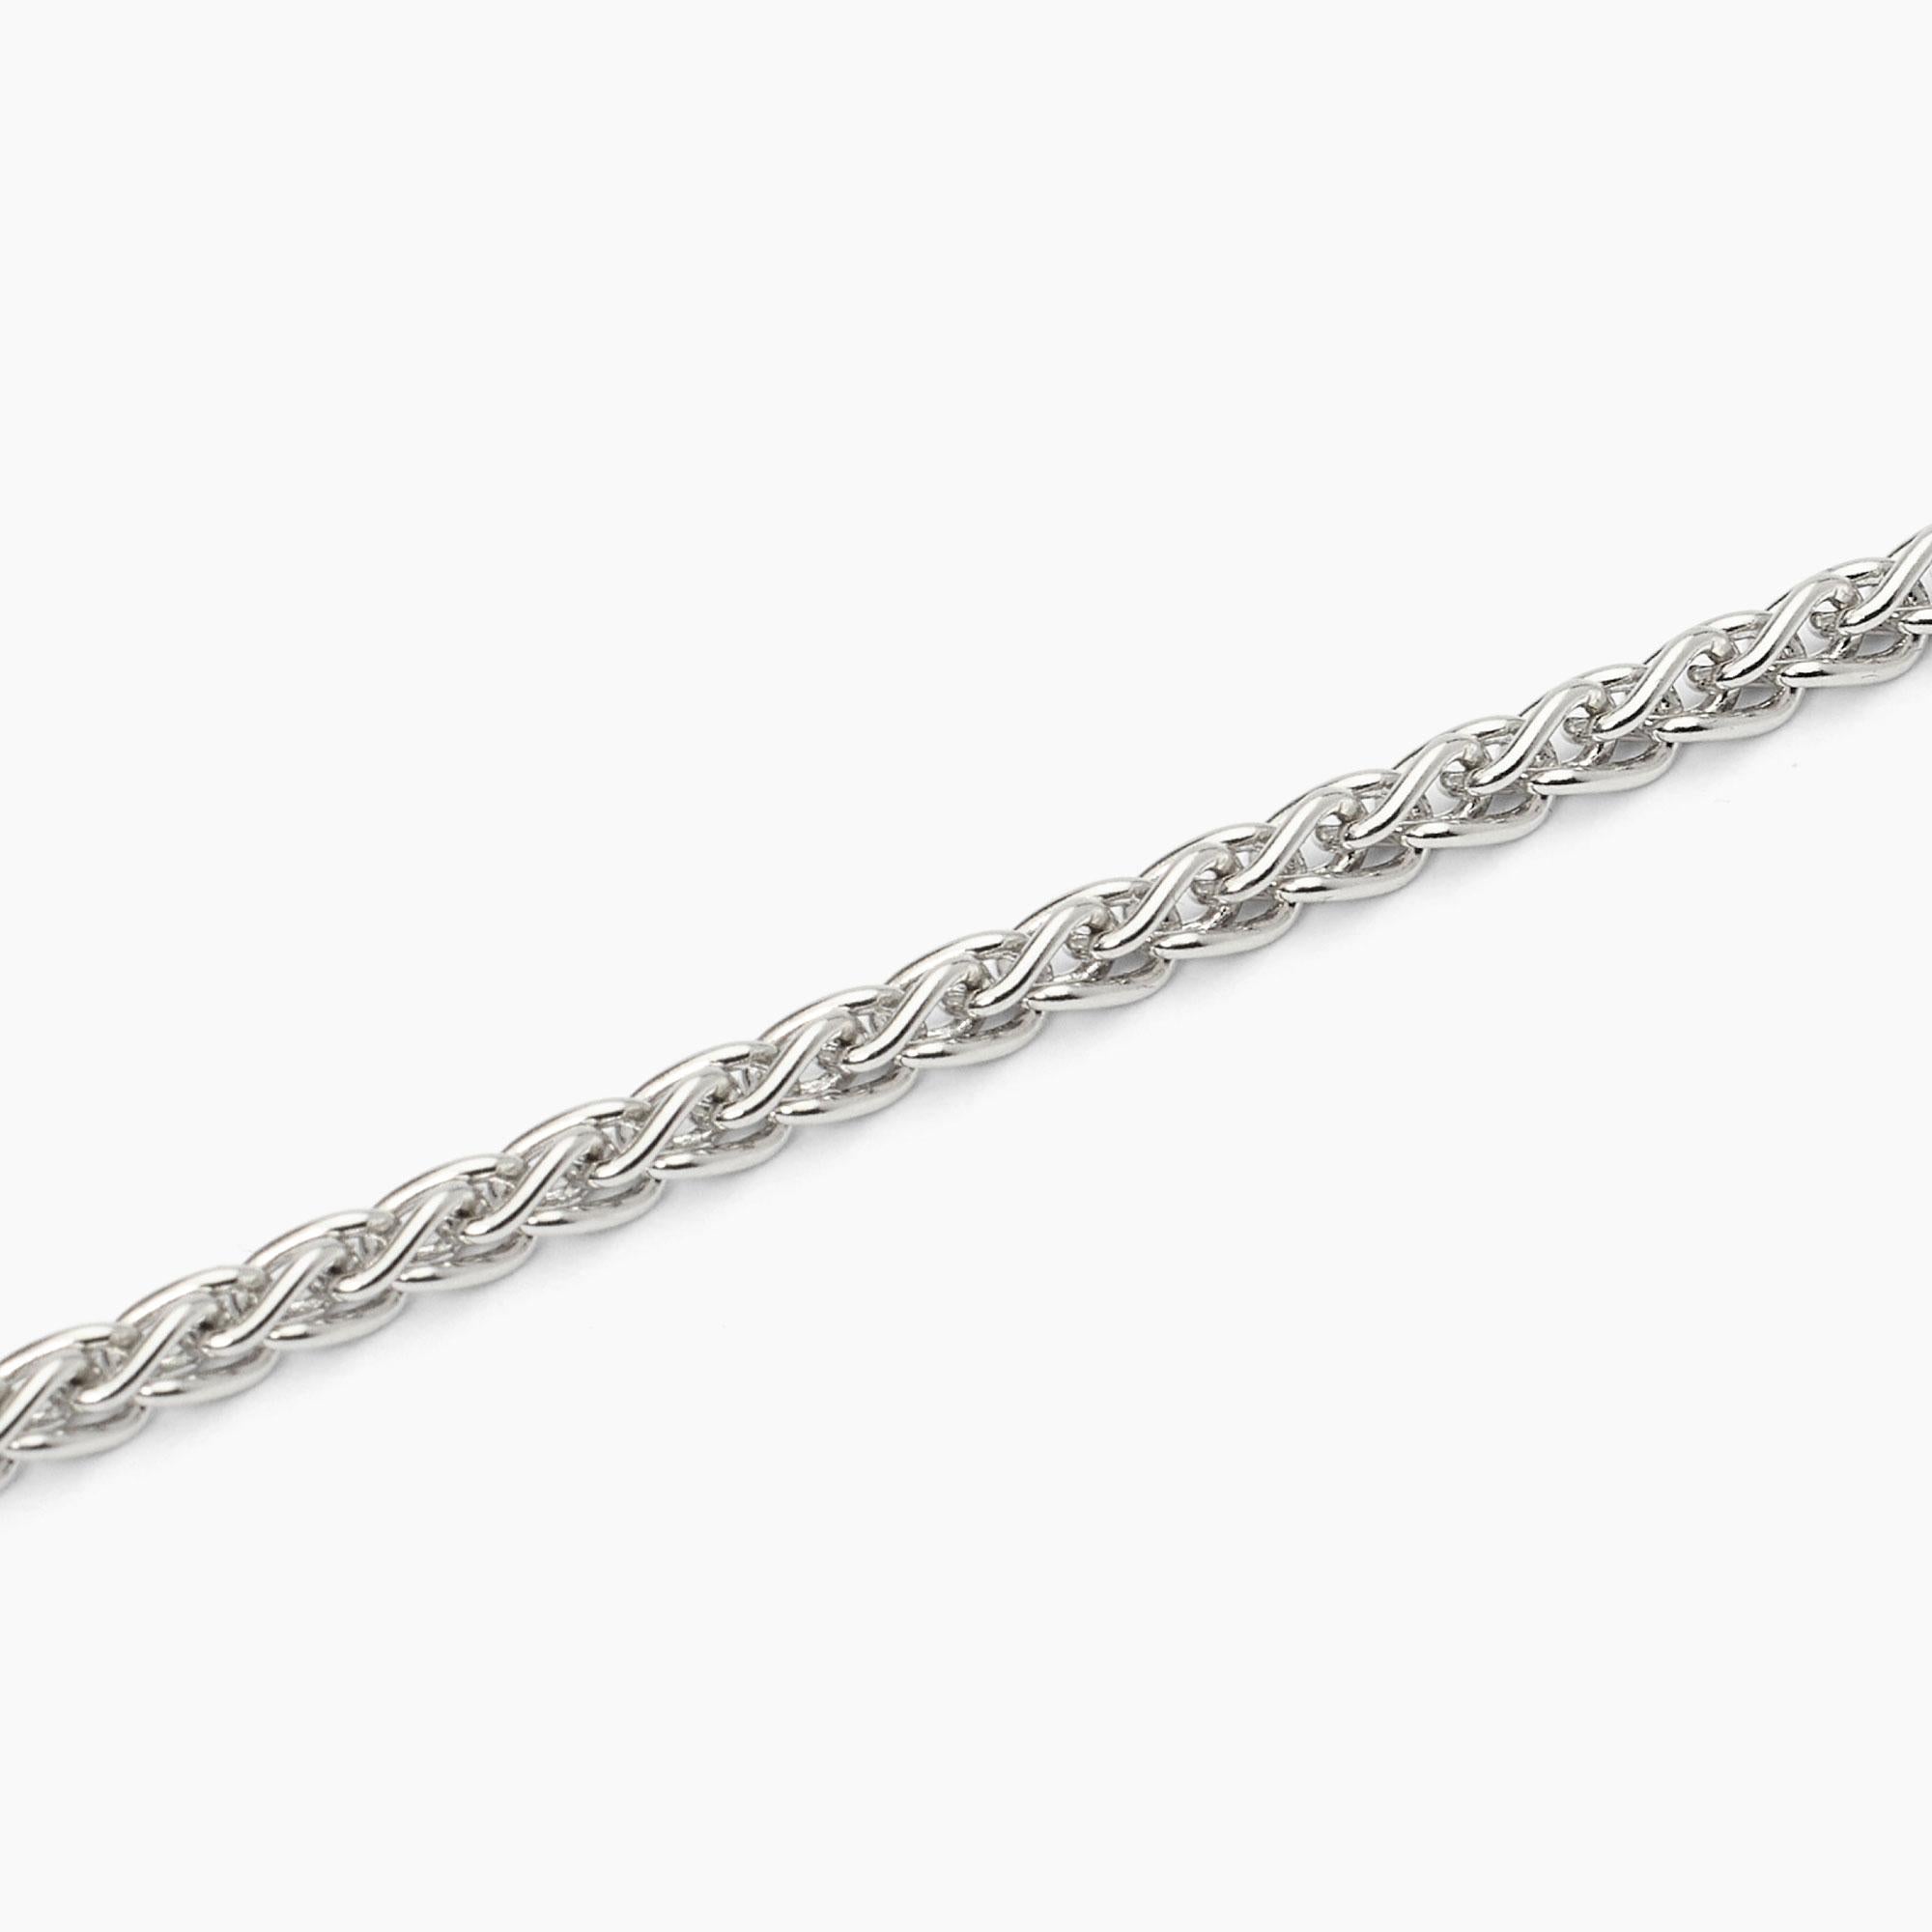 Mabina Man - Silver bracelet with spike chain EVERY DAY - 533801